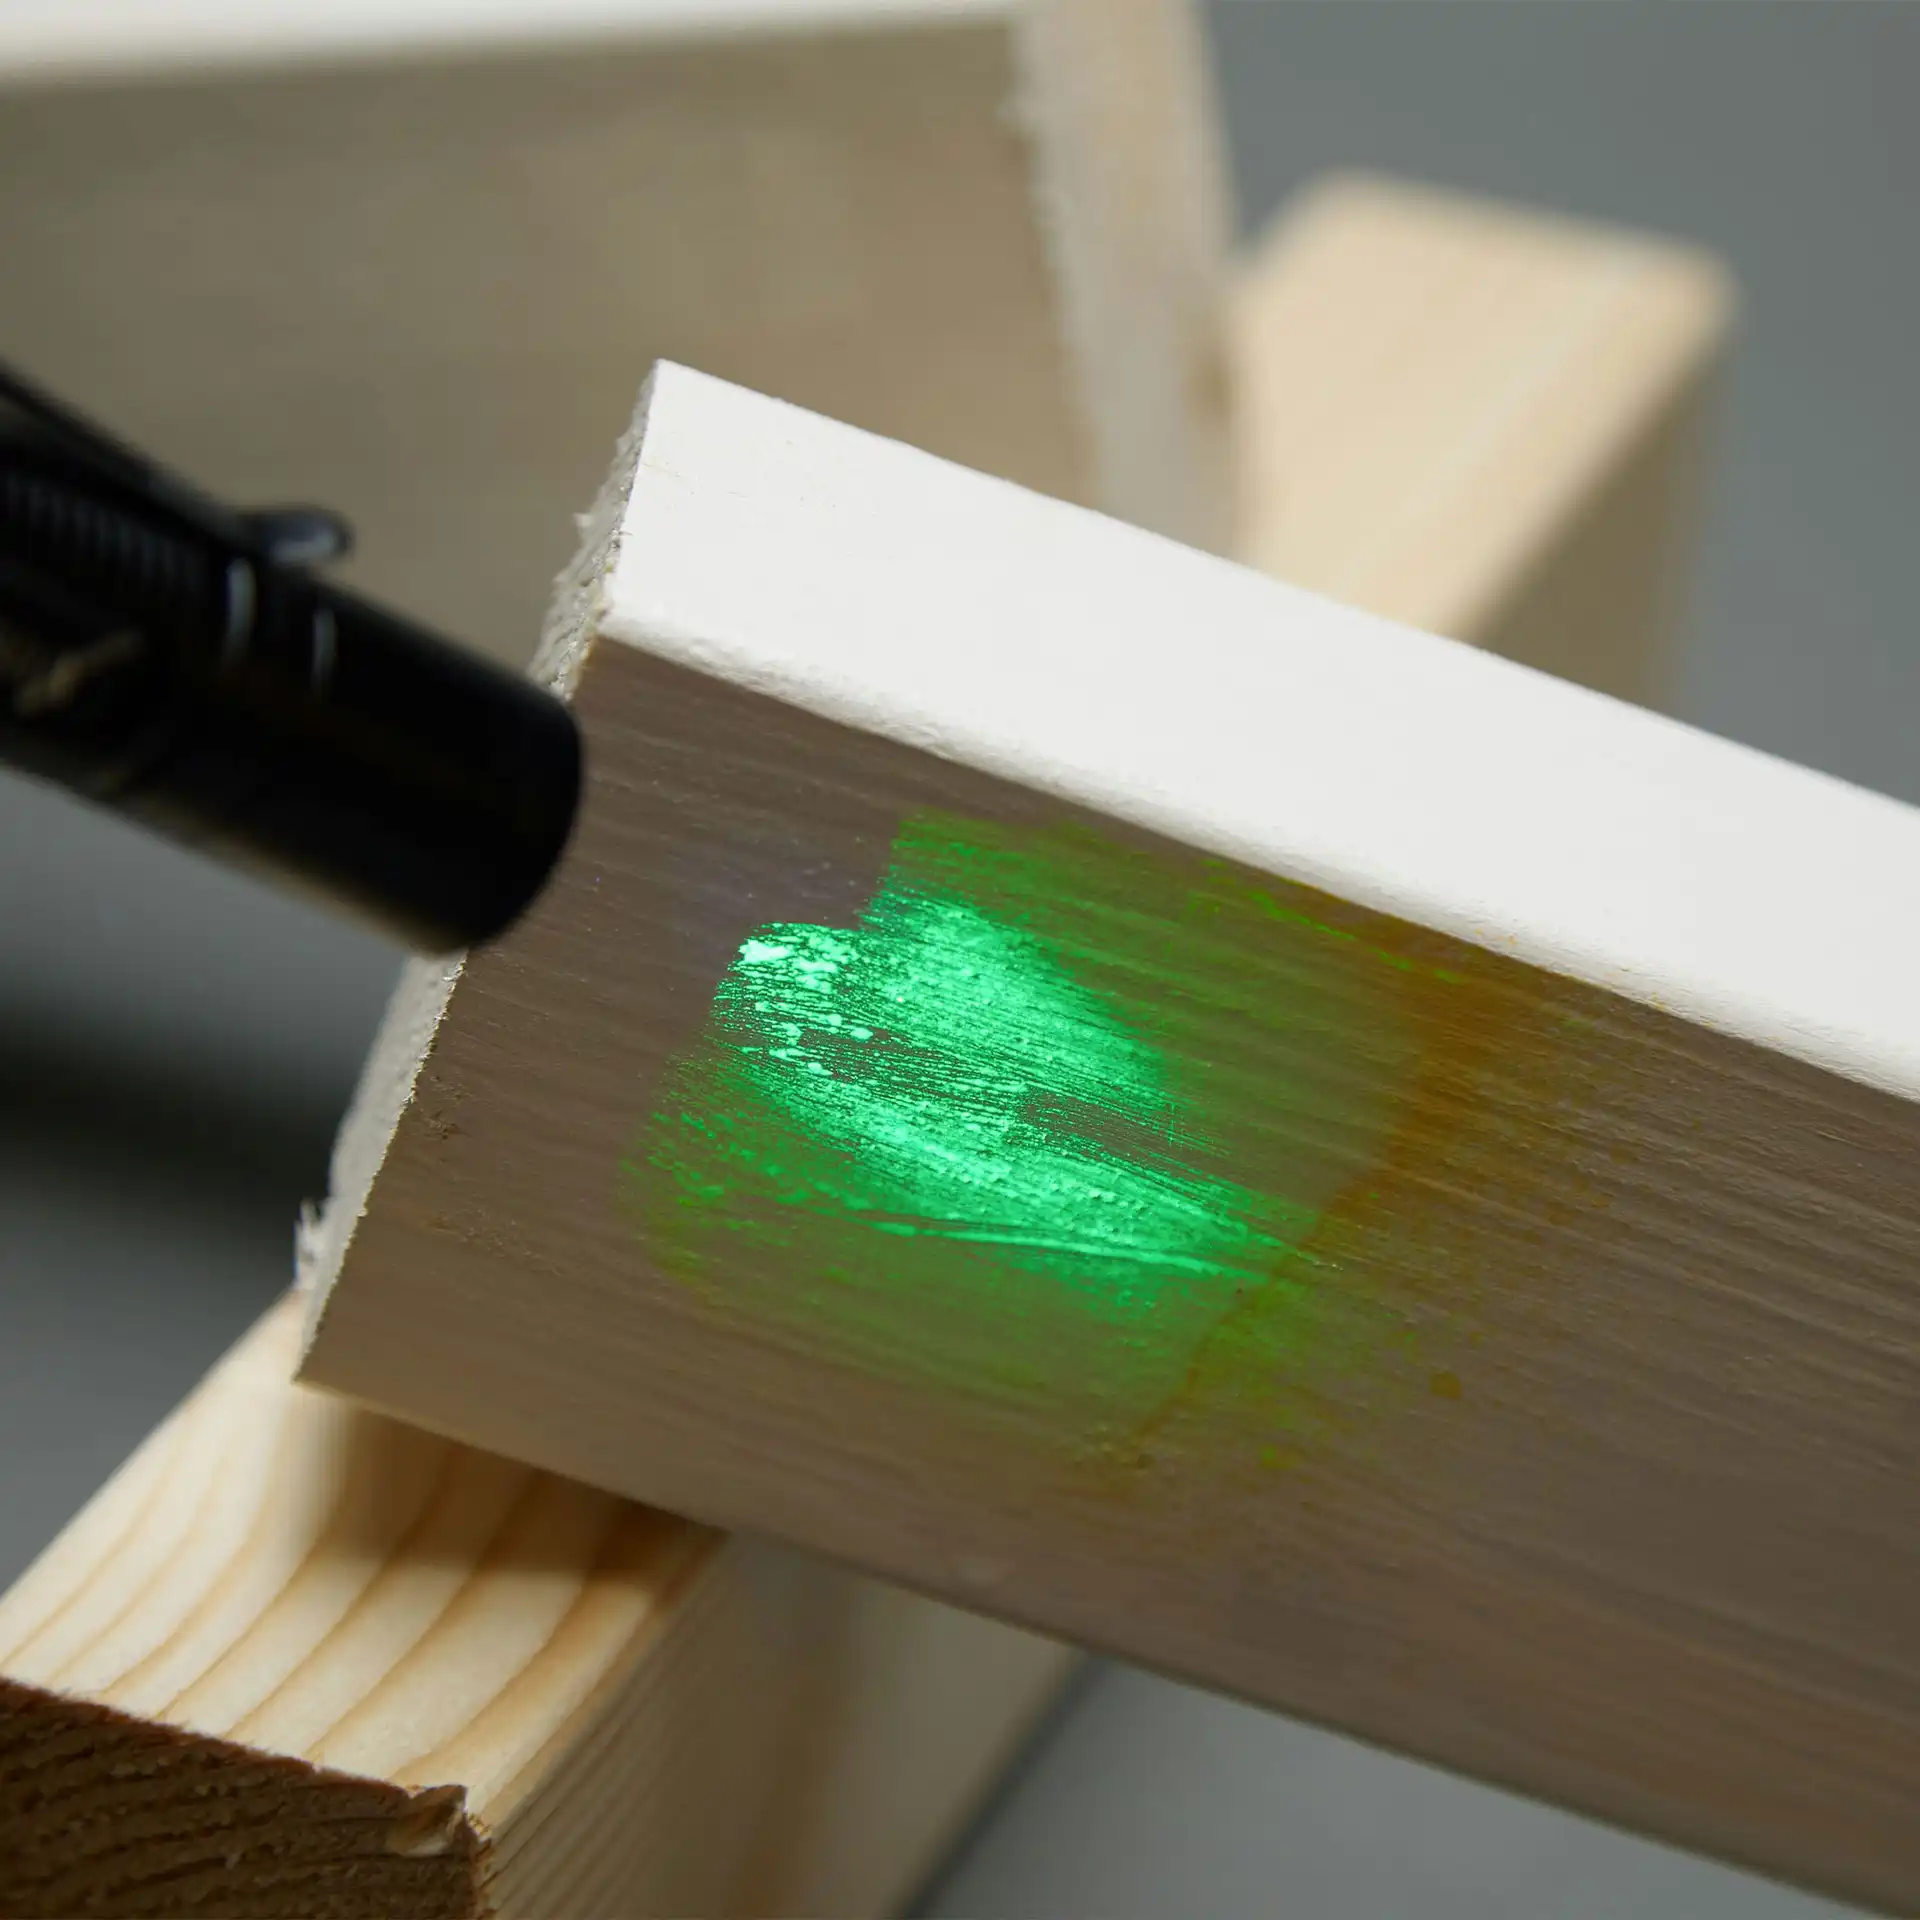 A close up on a flashlight shining on sprayed Reagent on a painted log of wood